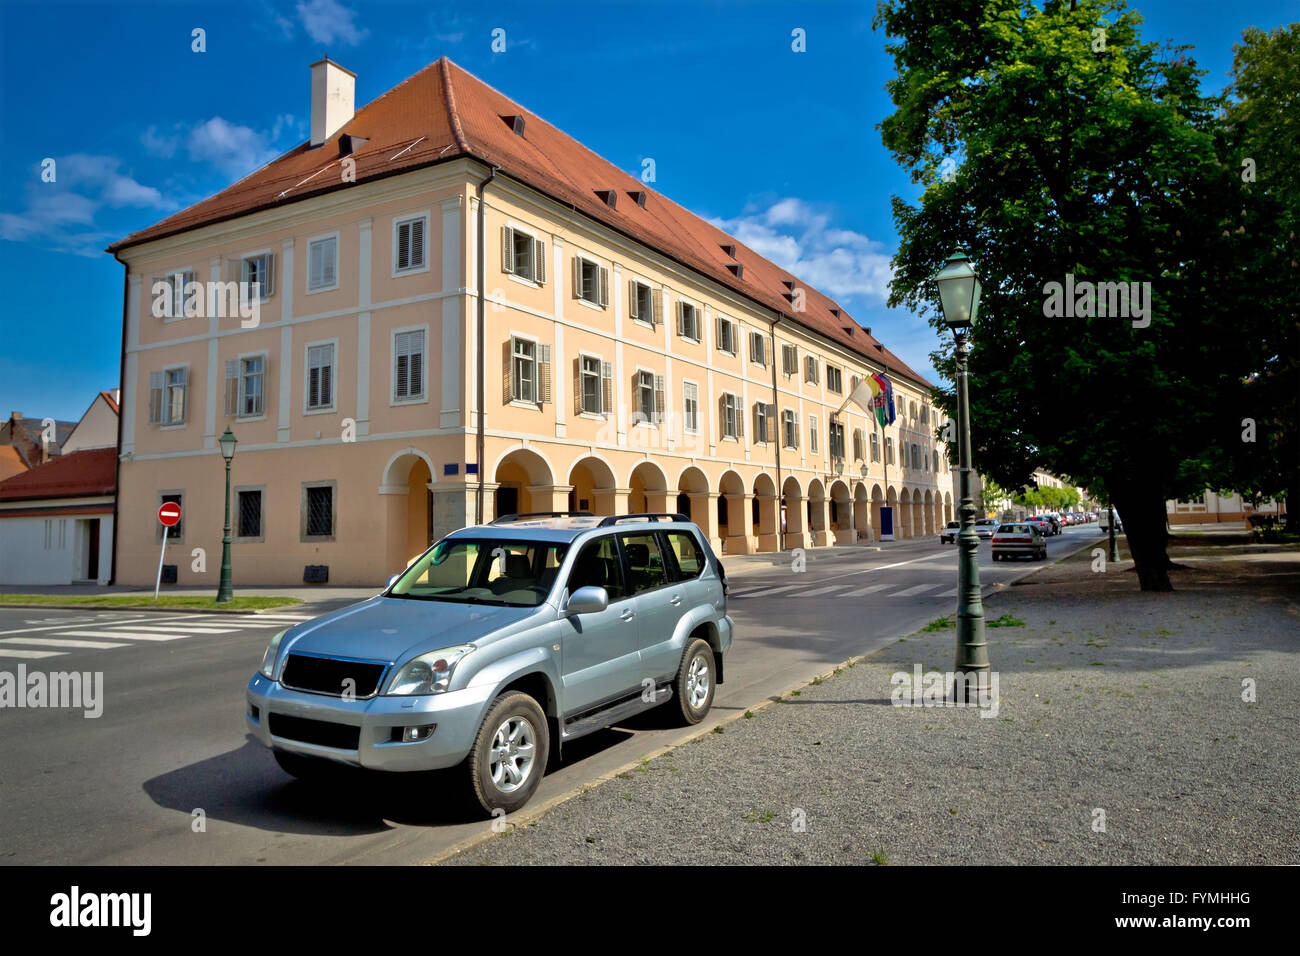 Town of Bjelovar square architecture Stock Photo